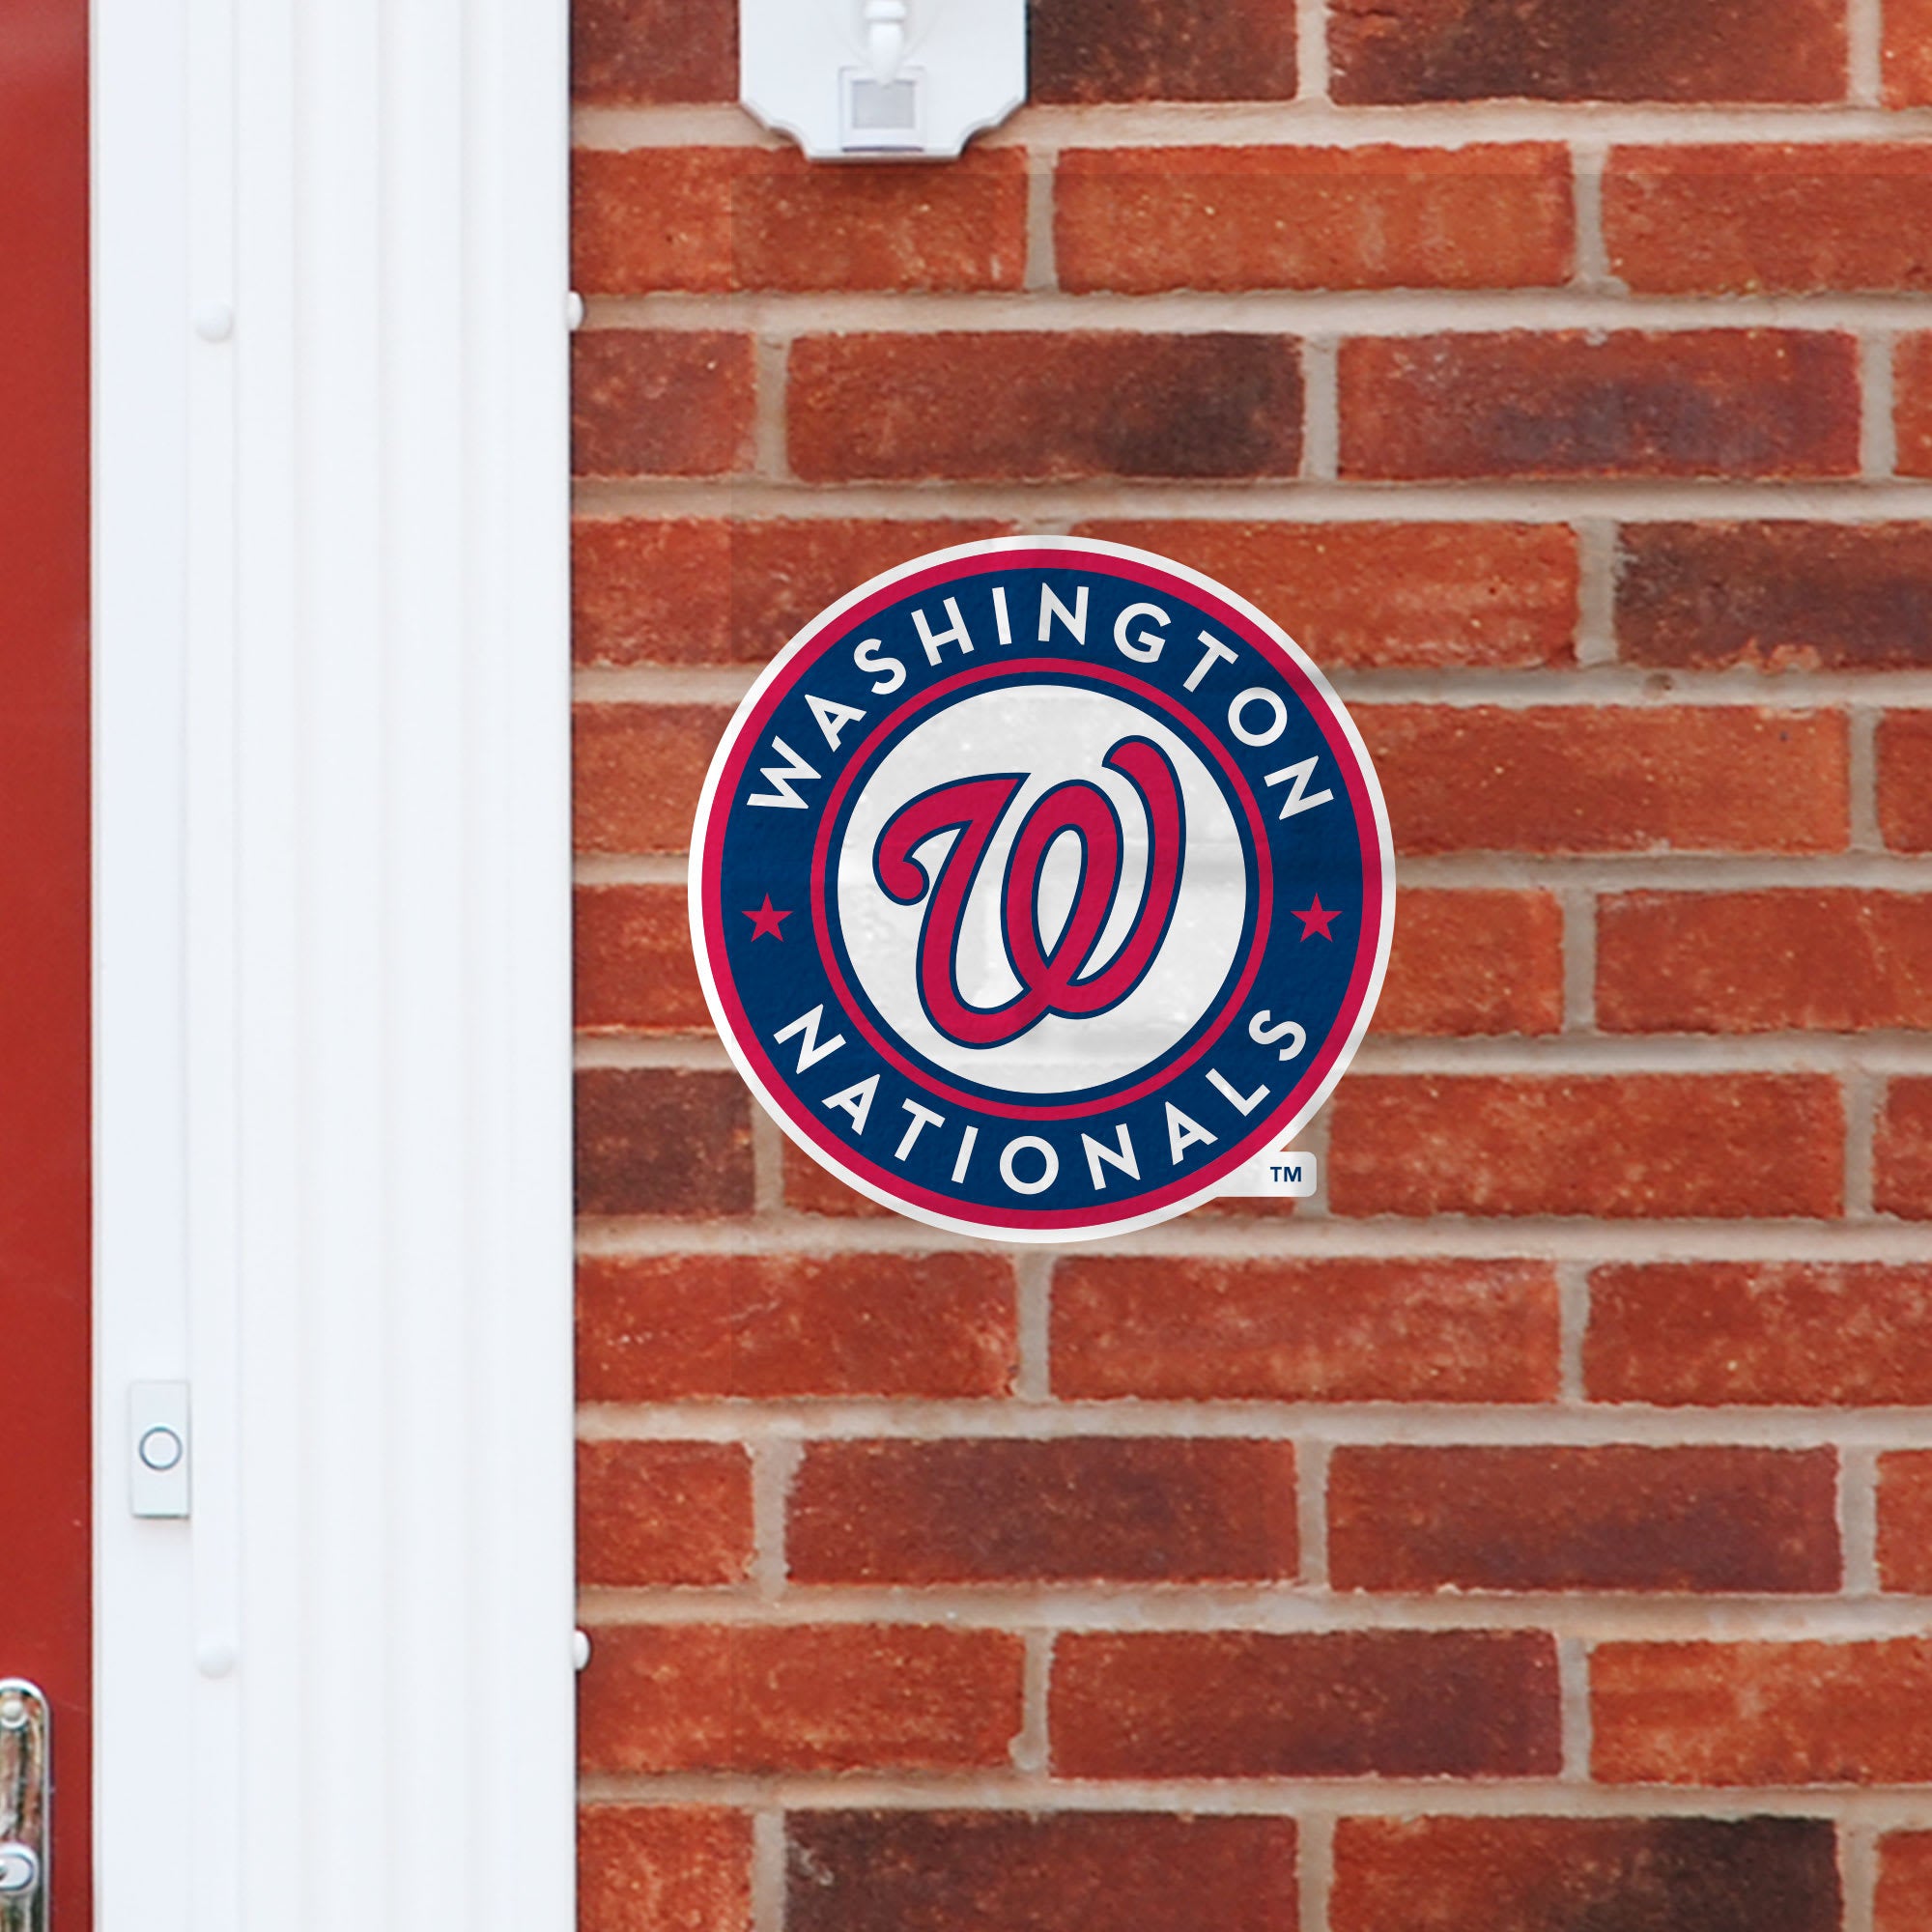 Washington Nationals: Logo - Officially Licensed MLB Outdoor Graphic Large by Fathead | Wood/Aluminum